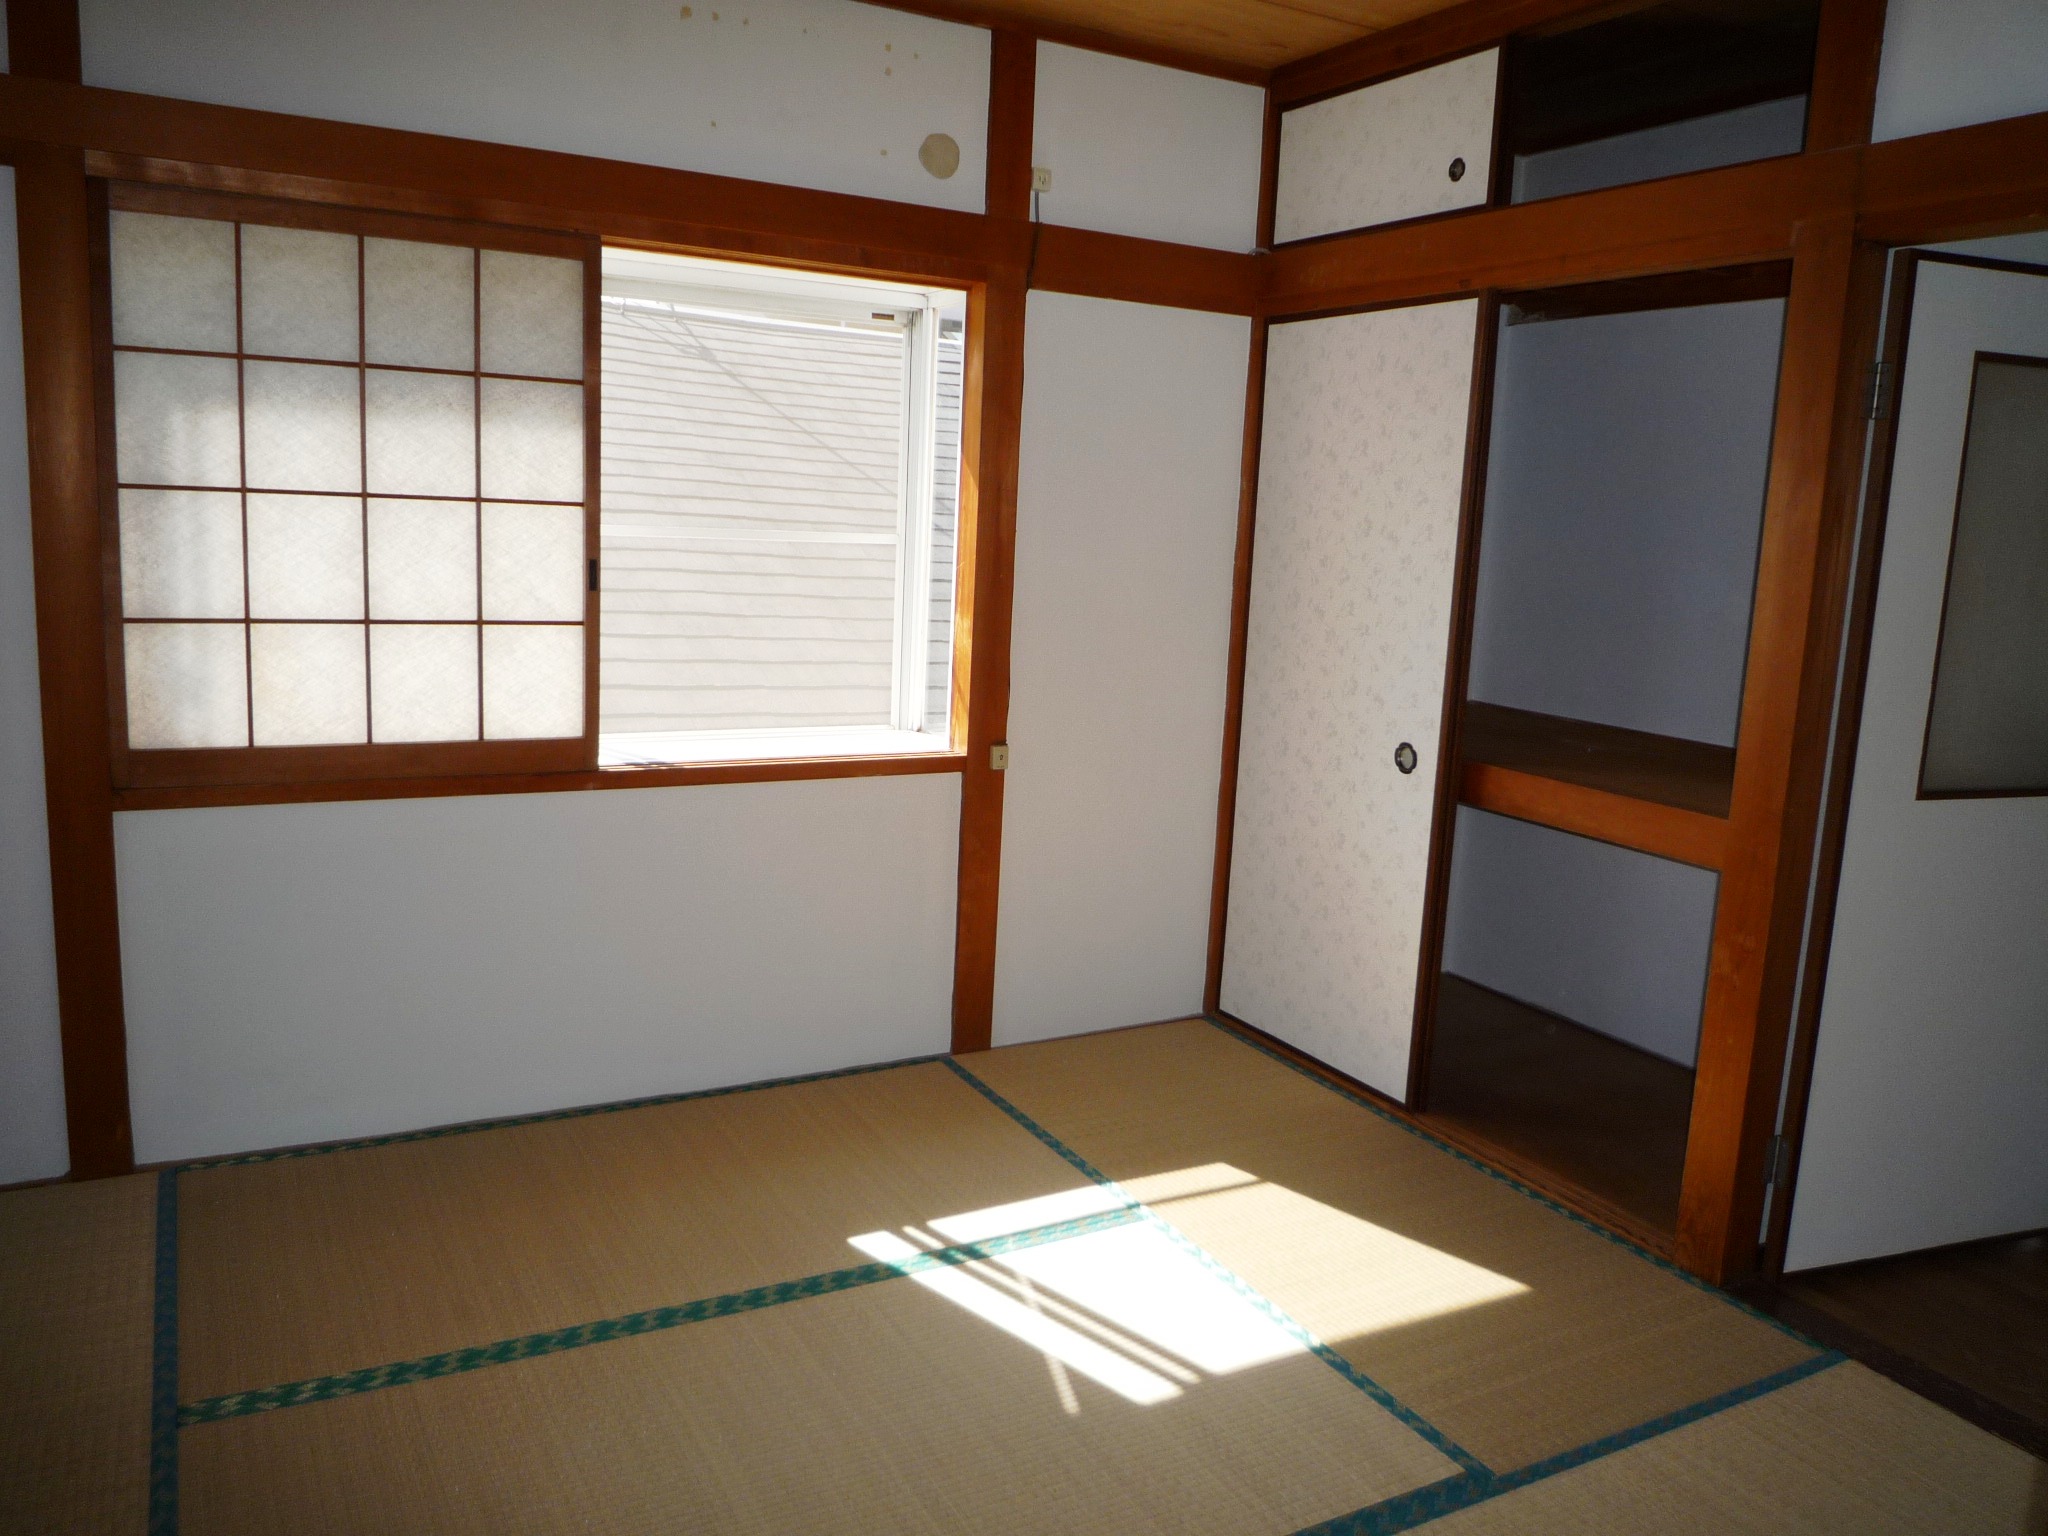 Other room space. The third floor Japanese-style room 6 quires